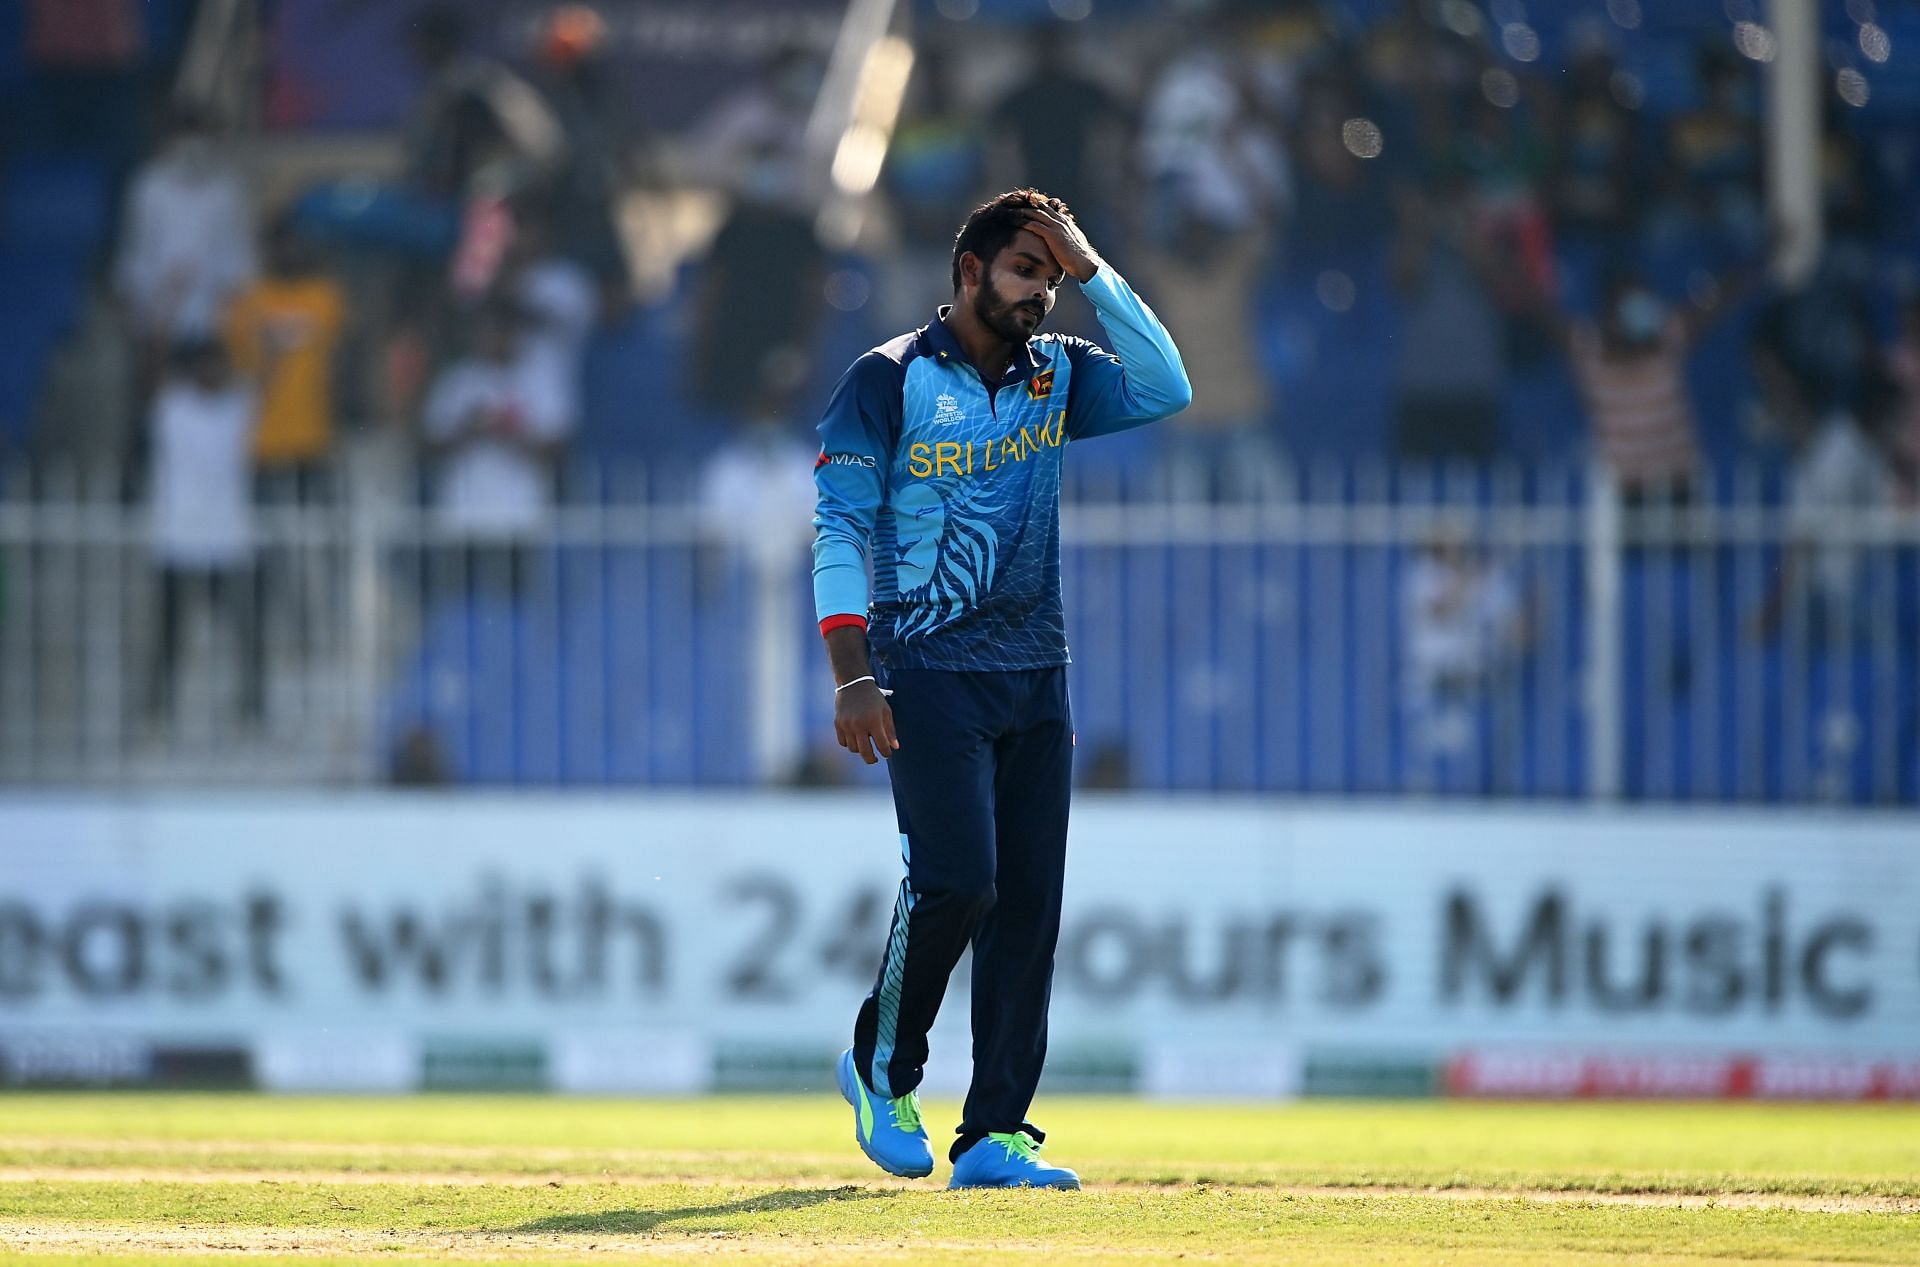 Sri Lanka suffered a heavy defeat in the first game of the series (Credit: Getty Images)